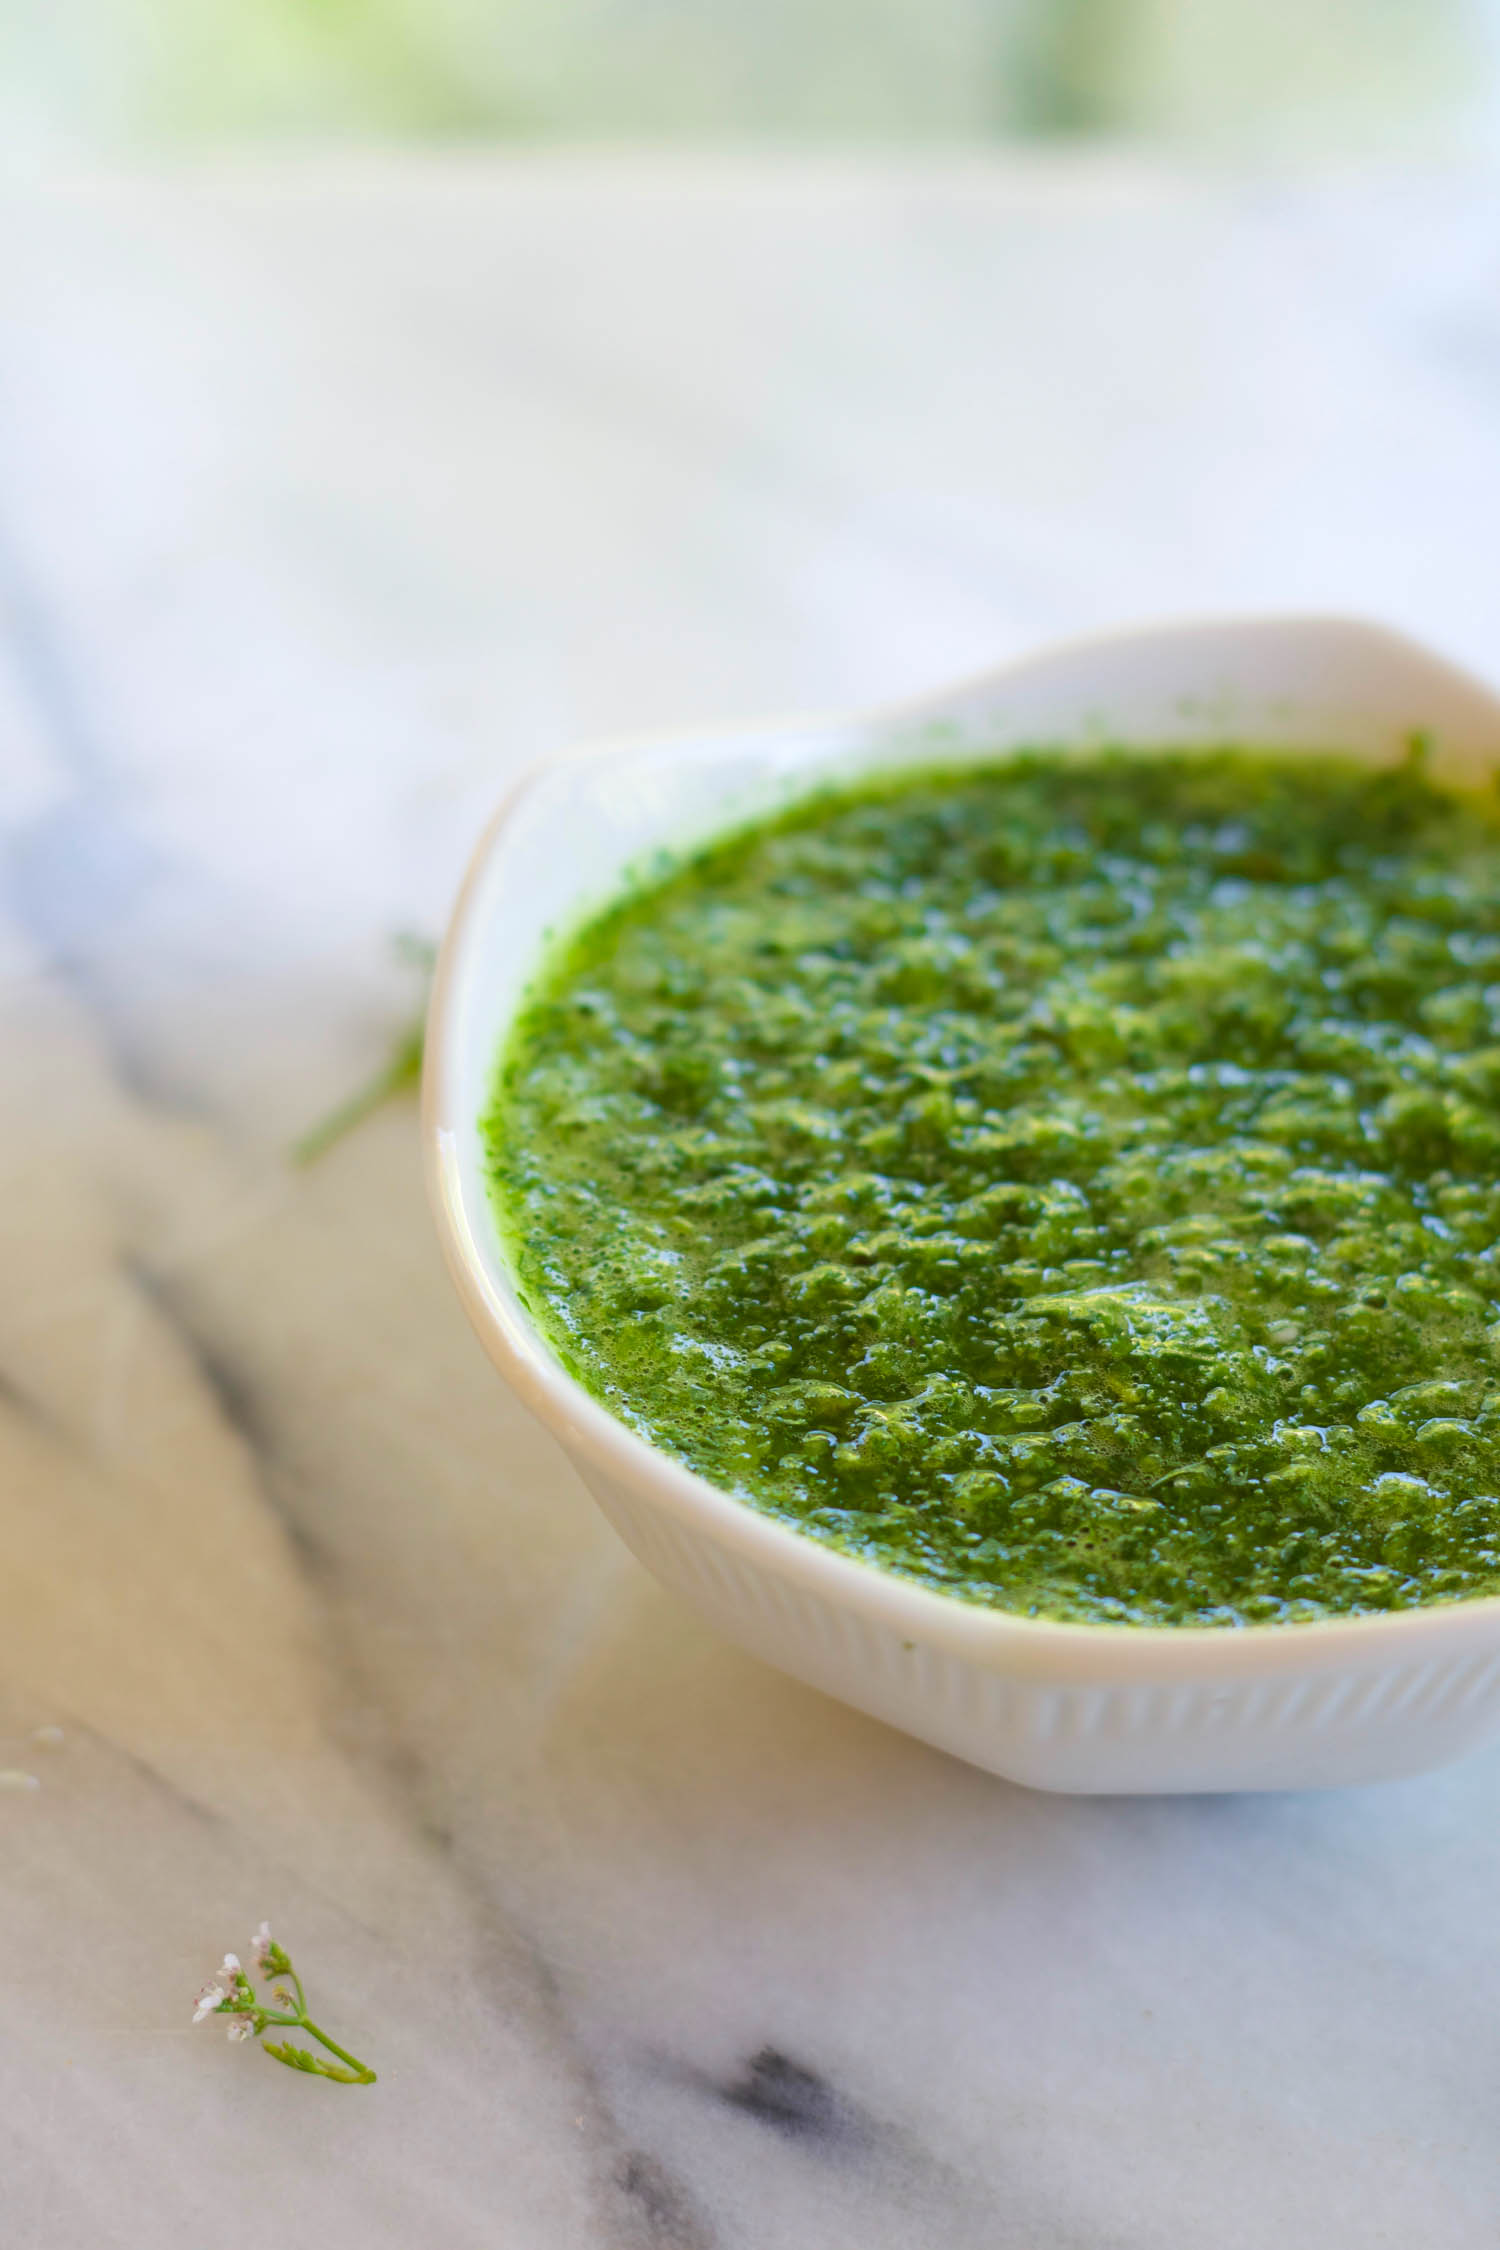 Chimichurri-ish is a quick &amp; easy sauce for grilled veggies, sandwiches, grains, salads, or whatever you'd like! By Beautiful Ingredient